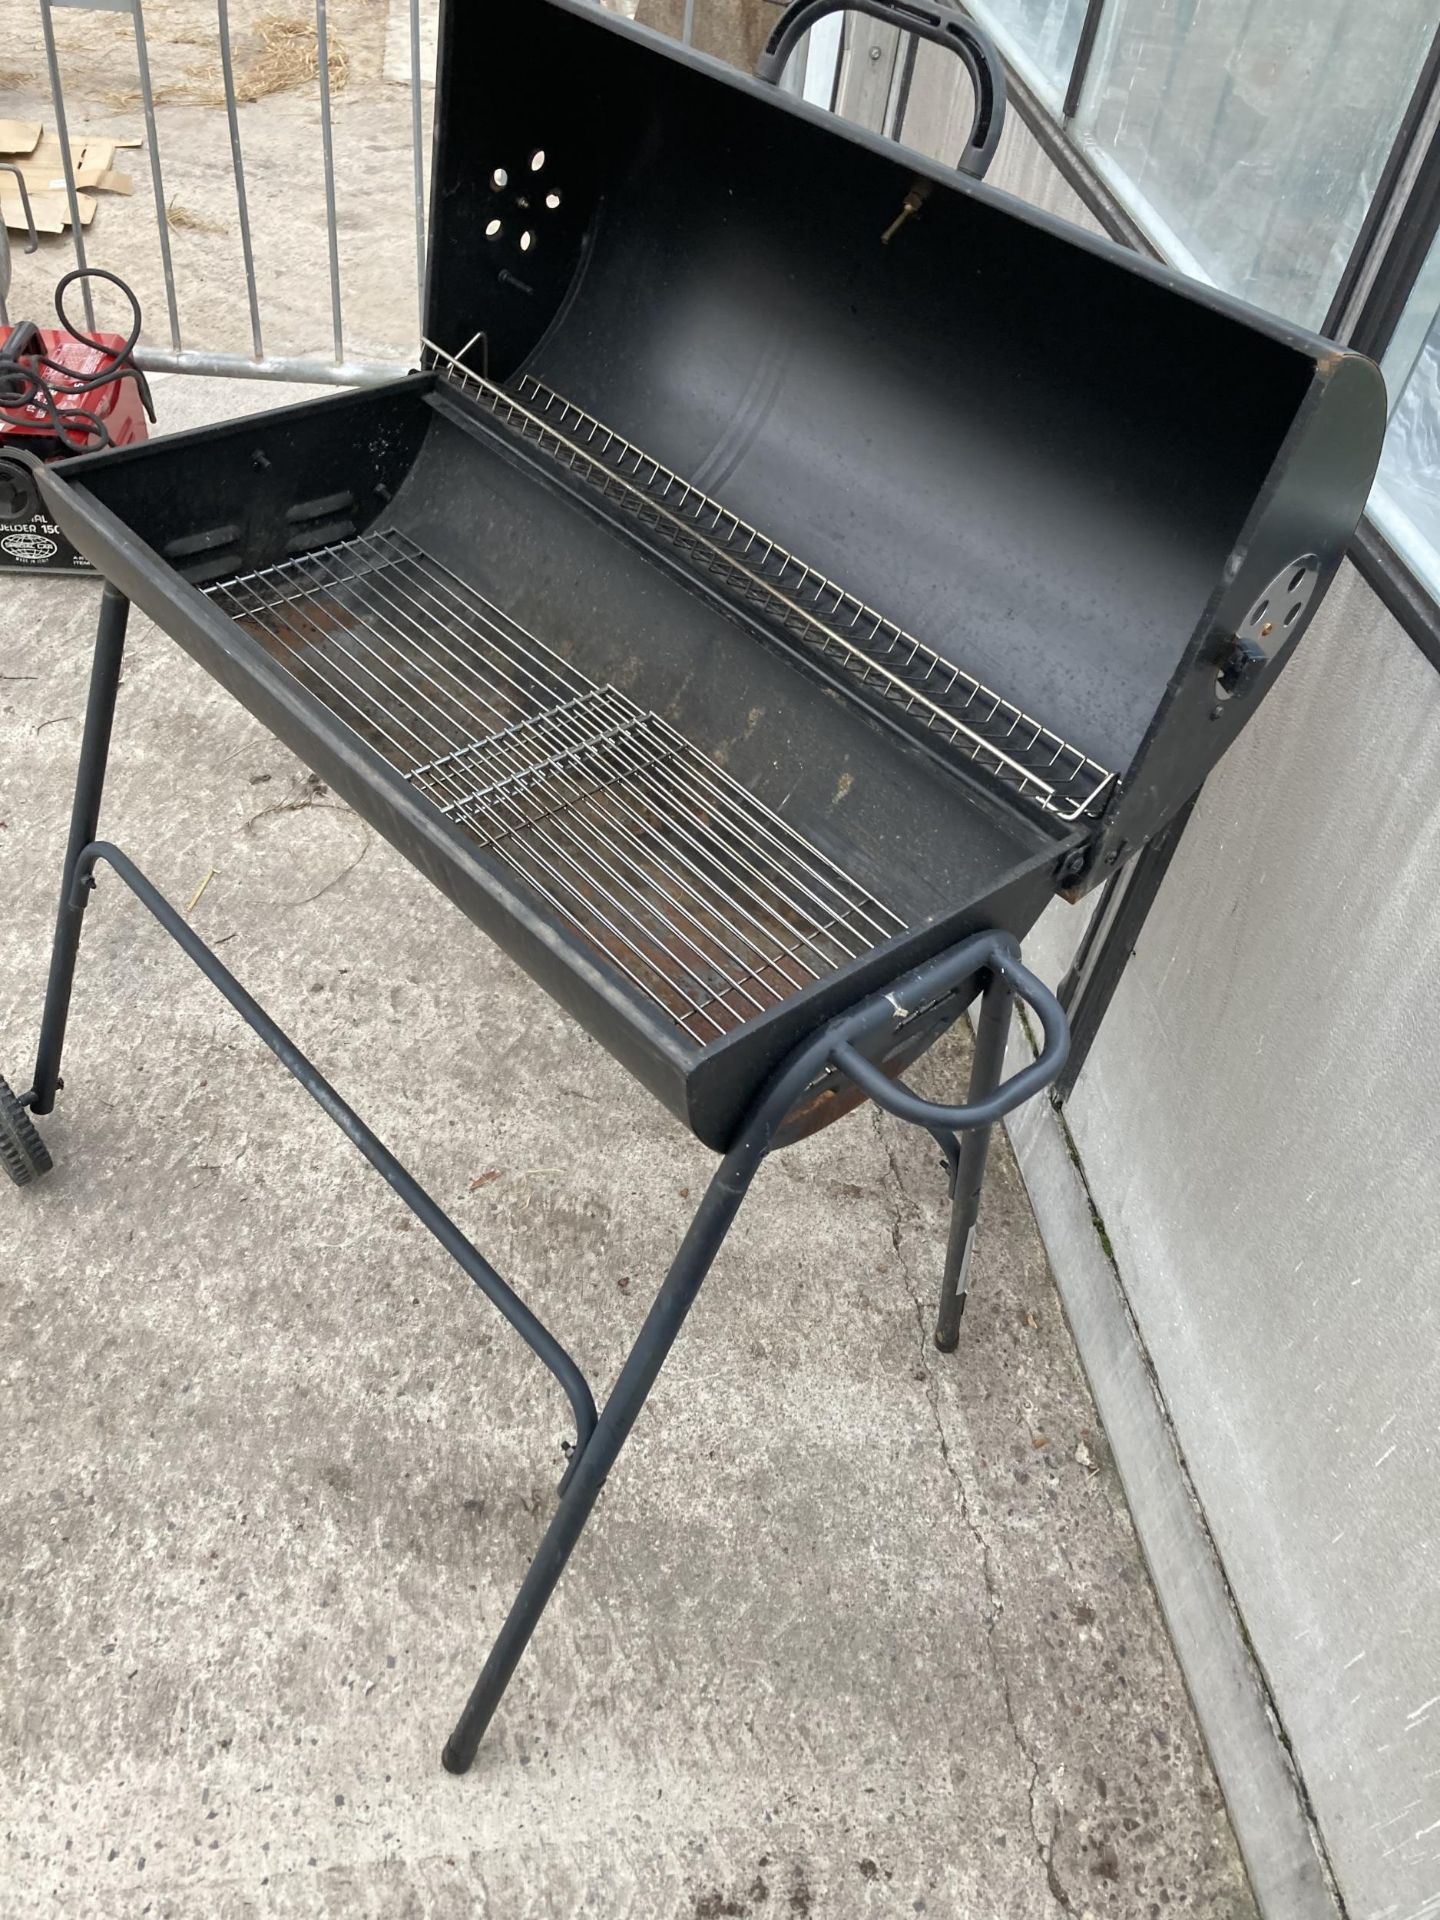 A SMALL METAL CHARCOAL BBQ - Image 3 of 3